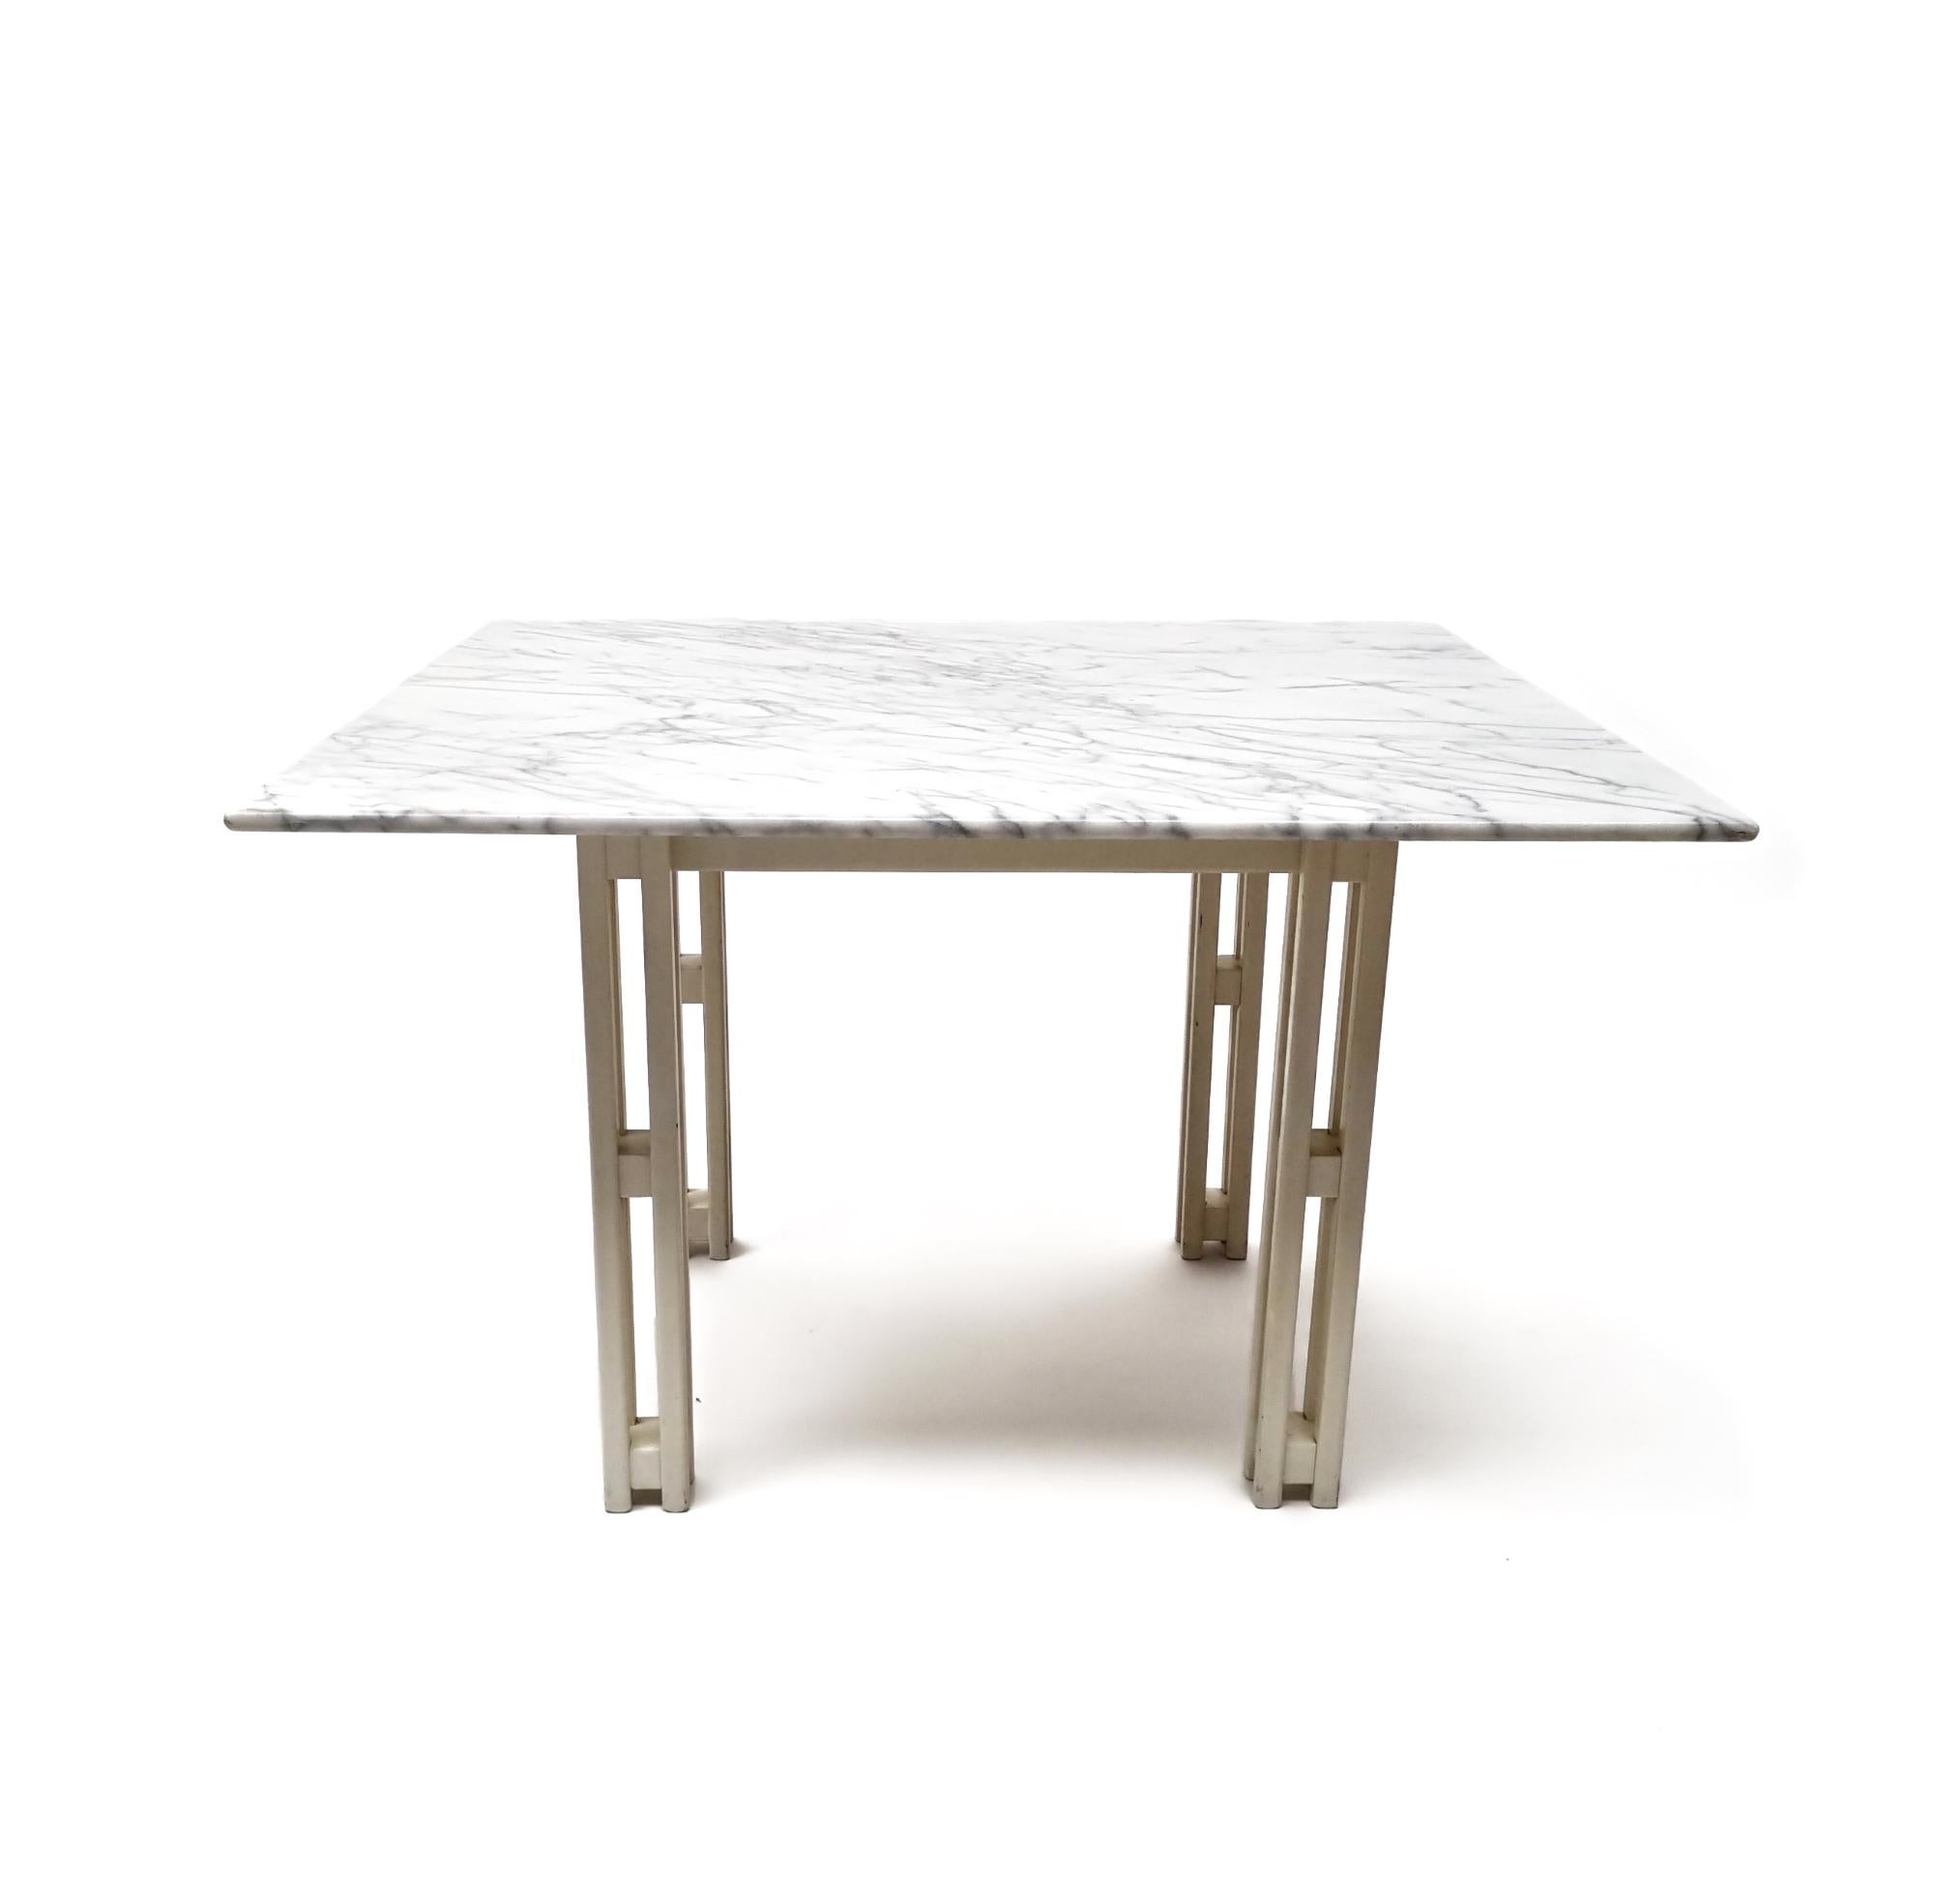 Elevate your dining experience with this Italian marble and beechwood dining table!

The elegance of its square design is complemented by a beautifully flamed Carrara marble top, while the white beechwood legs add a touch of sophistication.

In good